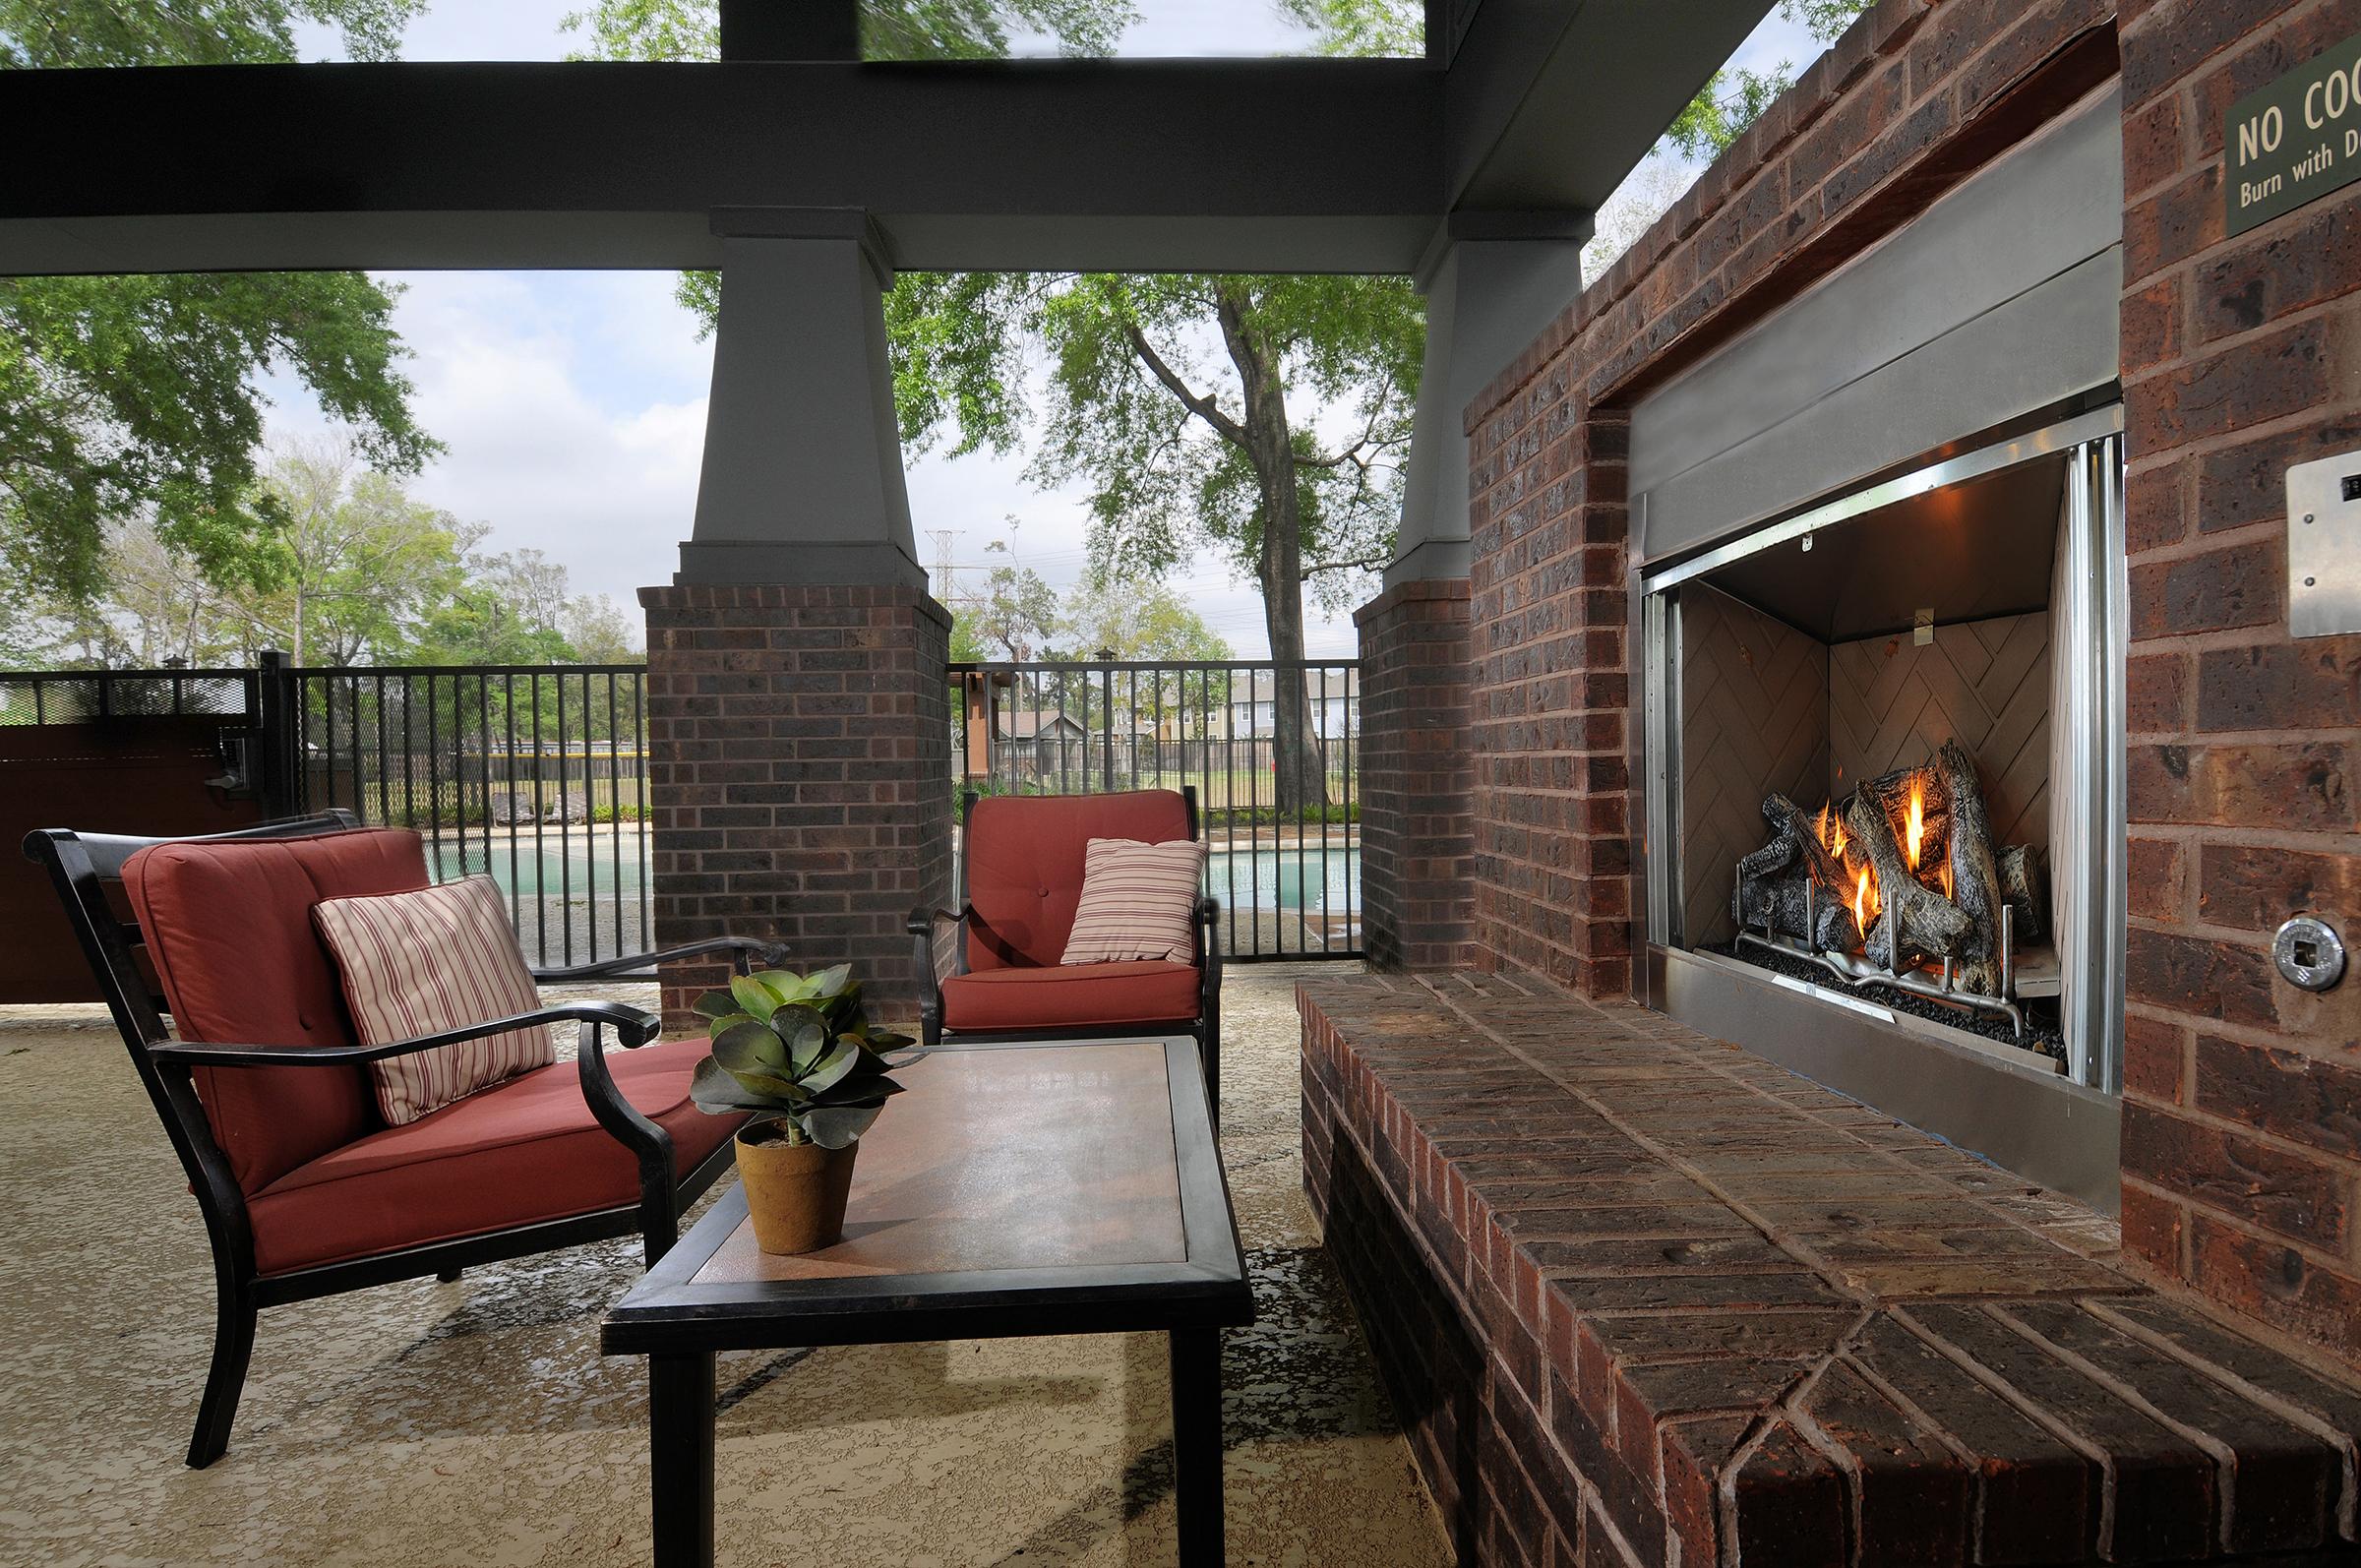 chairs and coffee table in front of an outdoor brick fireplace